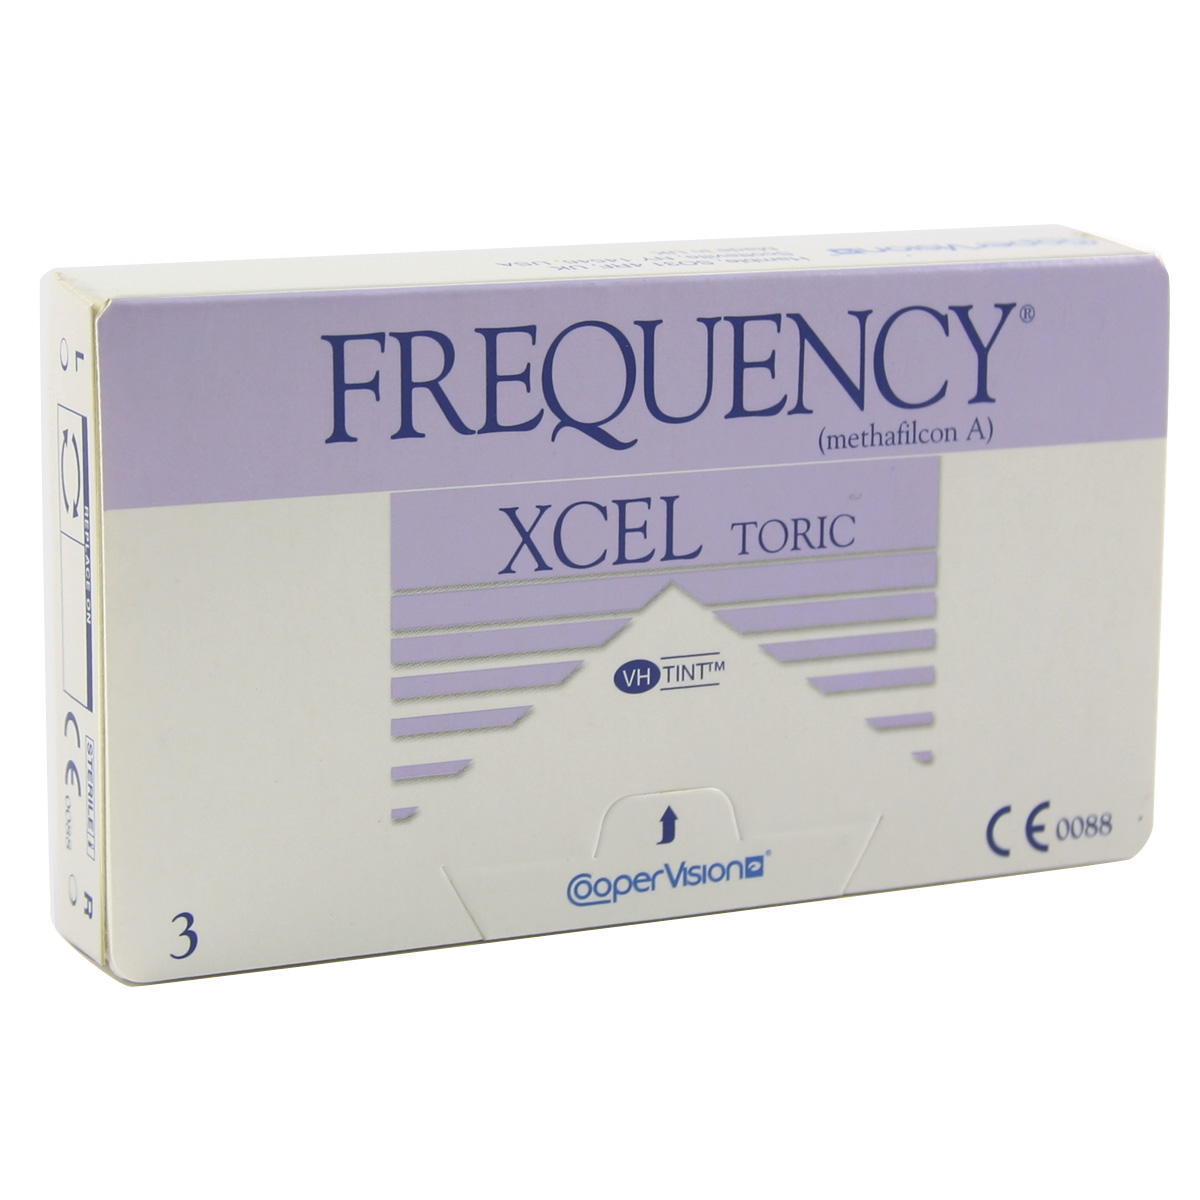 Frequency Xcel Toric (3 lenses)